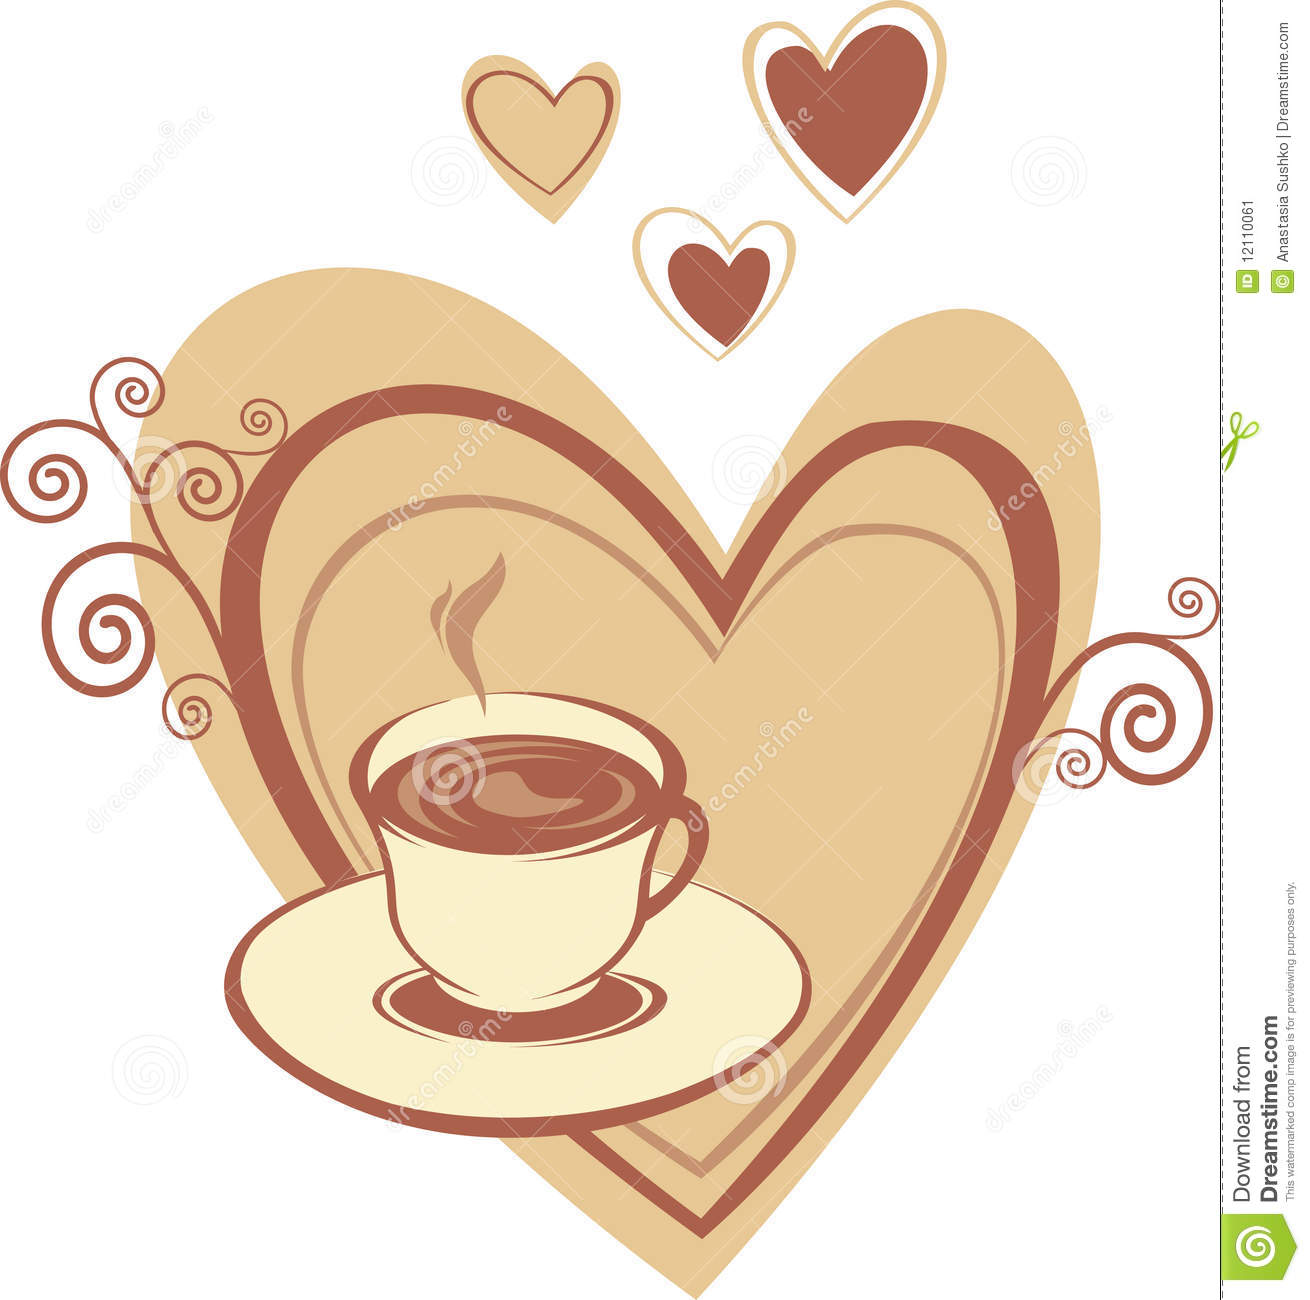 Coffee Cup With Heart Stock Image   Image  12110061